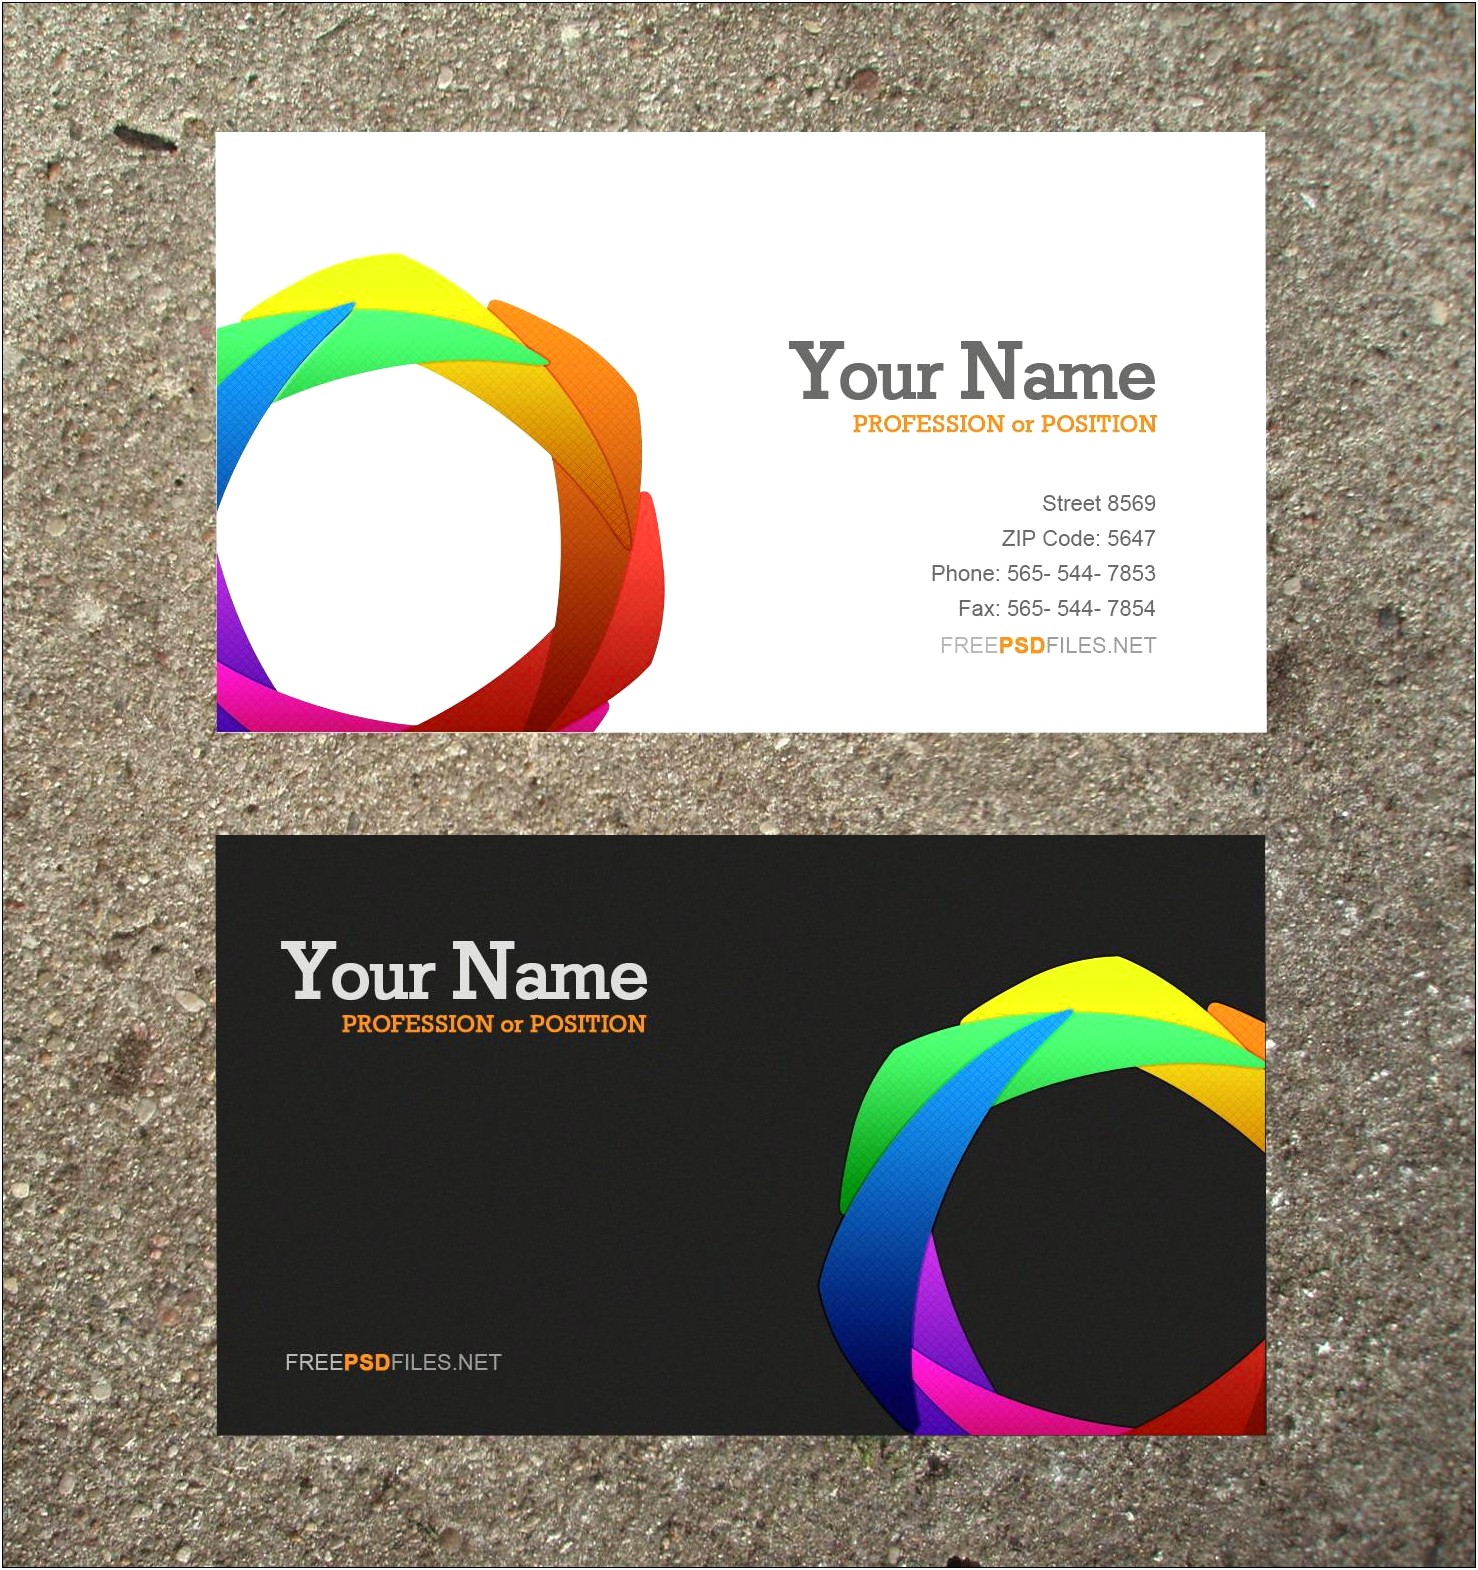 Business Cards Templates For Word Free Download